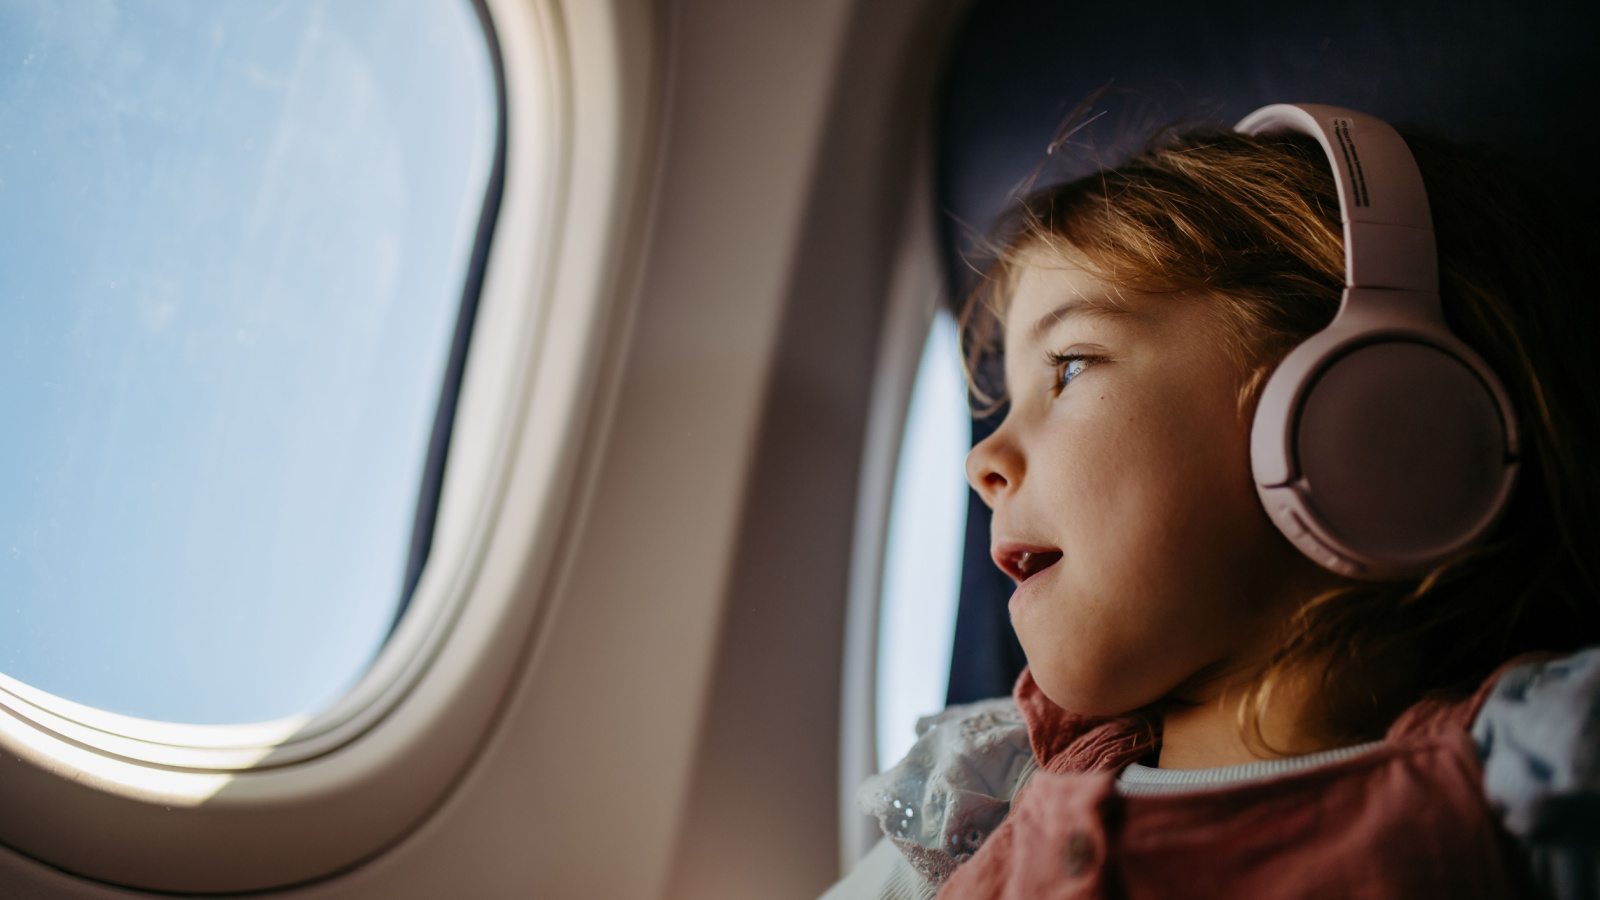 image credit: Halfpoint/Shutterstock <p>Wet wipes can be a lifesaver on long flights. Use them to wipe down your tray table, freshen up your face, or clean your hands. They’re especially handy if you’re traveling with kids. A parent on a family travel site says, “They’re perfect for quick clean-ups and feel so refreshing.”</p>